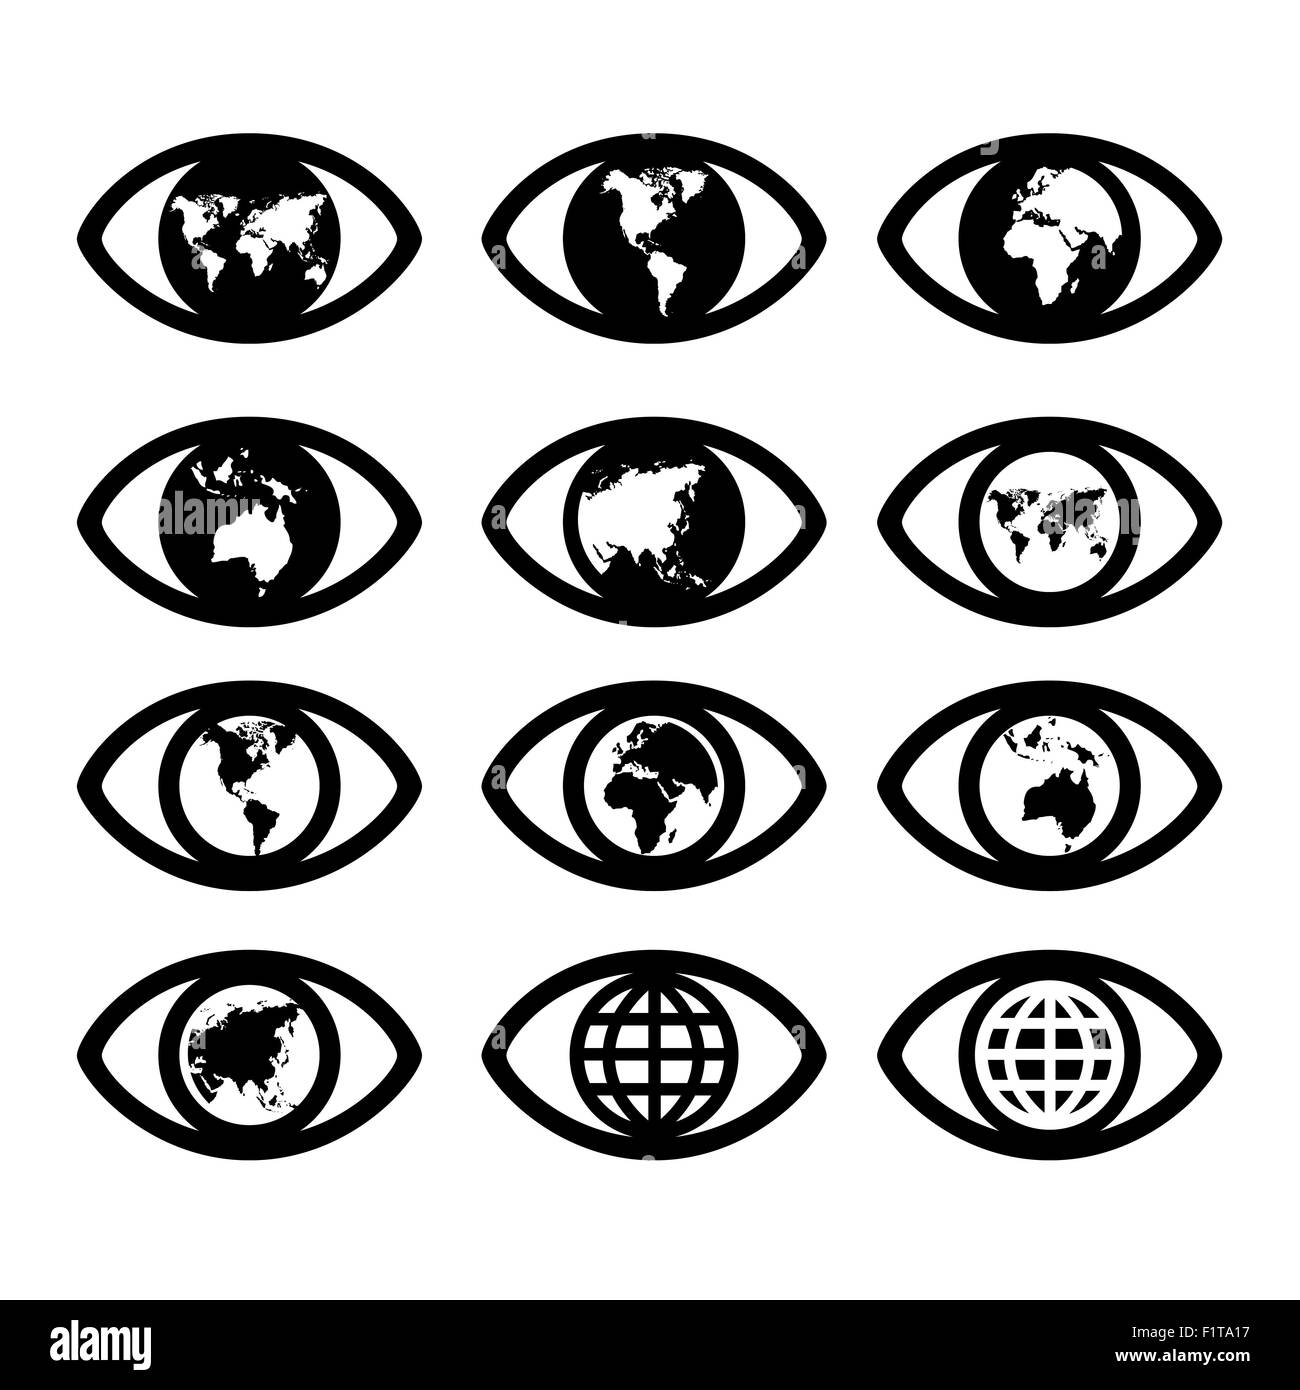 world map sign in the eye,eye sign,vision concept ,world symbol ,business concept. vector illustration Stock Photo